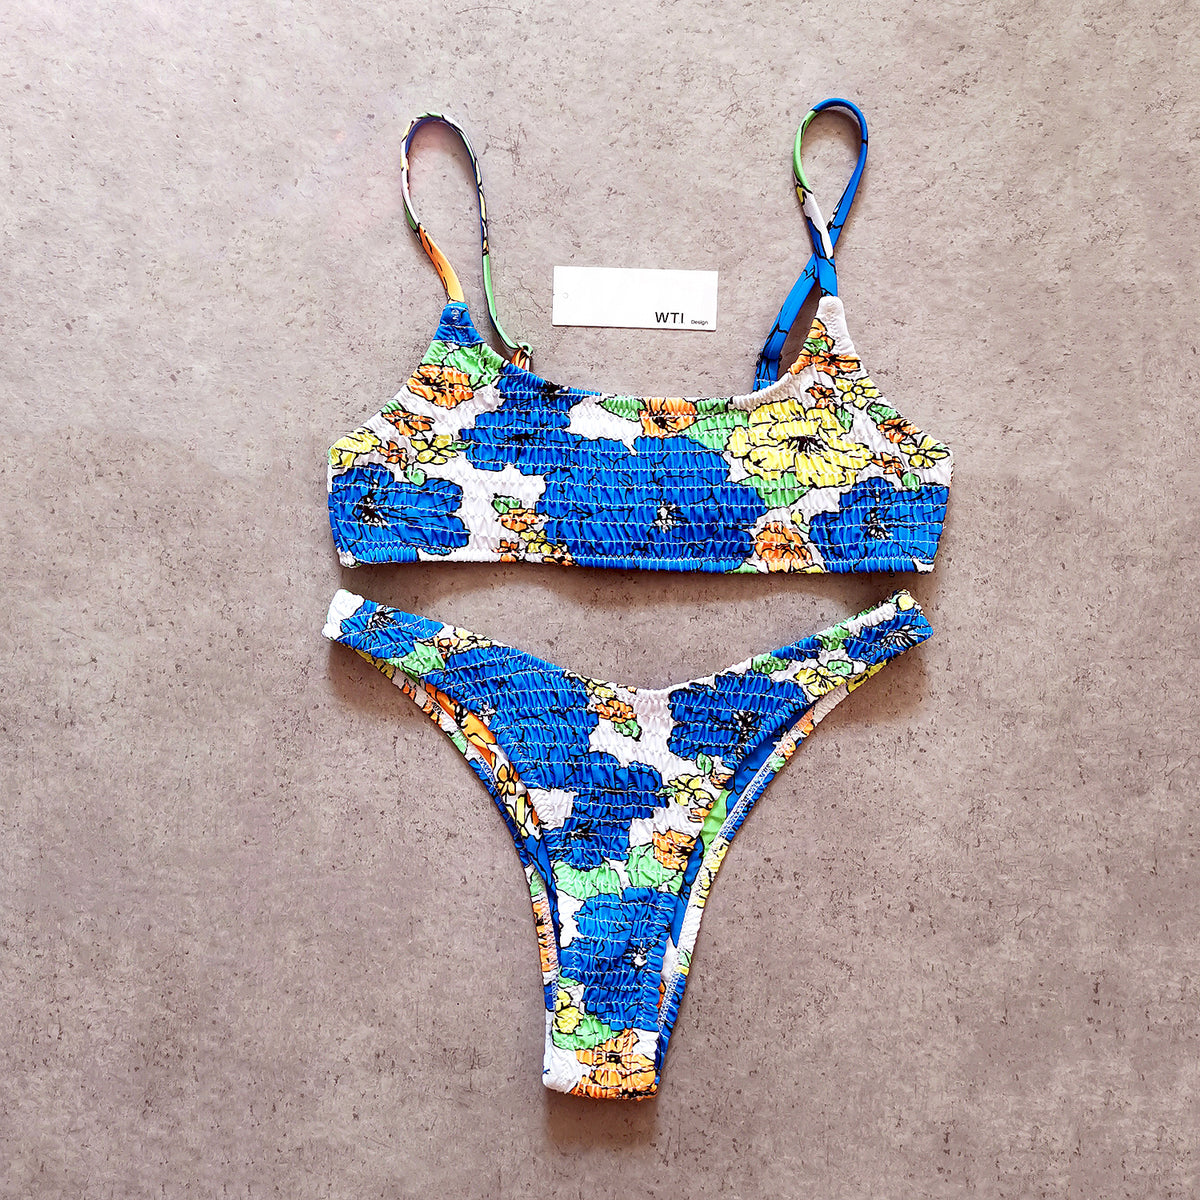 Floral Scrunched Crop Top Bikini Swimsuit SY20